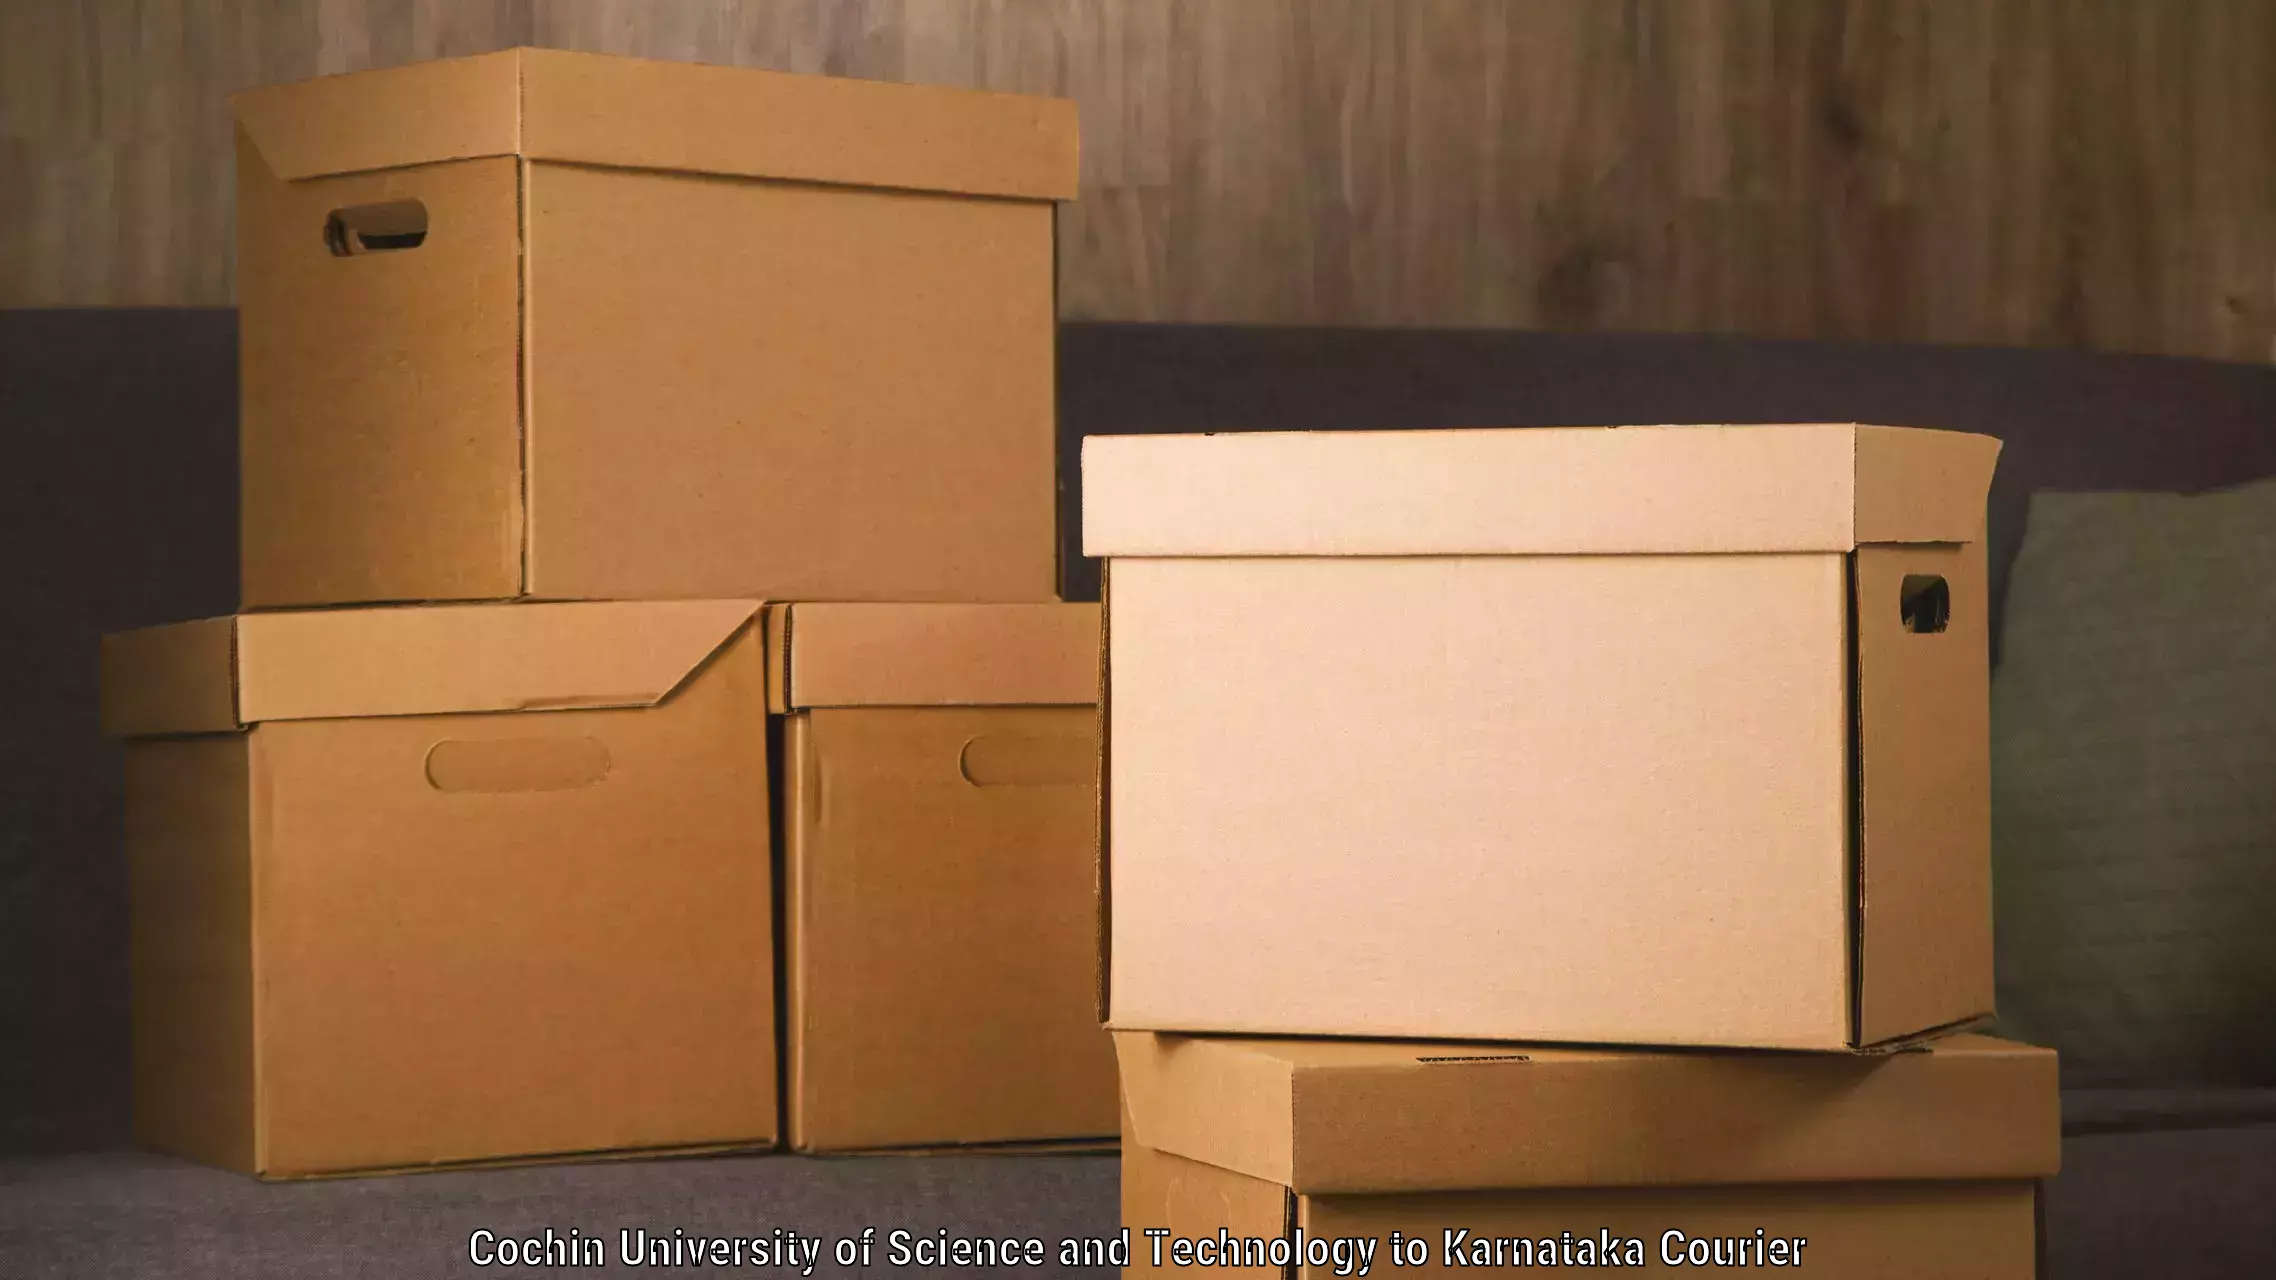 High-capacity parcel service Cochin University of Science and Technology to Manipal